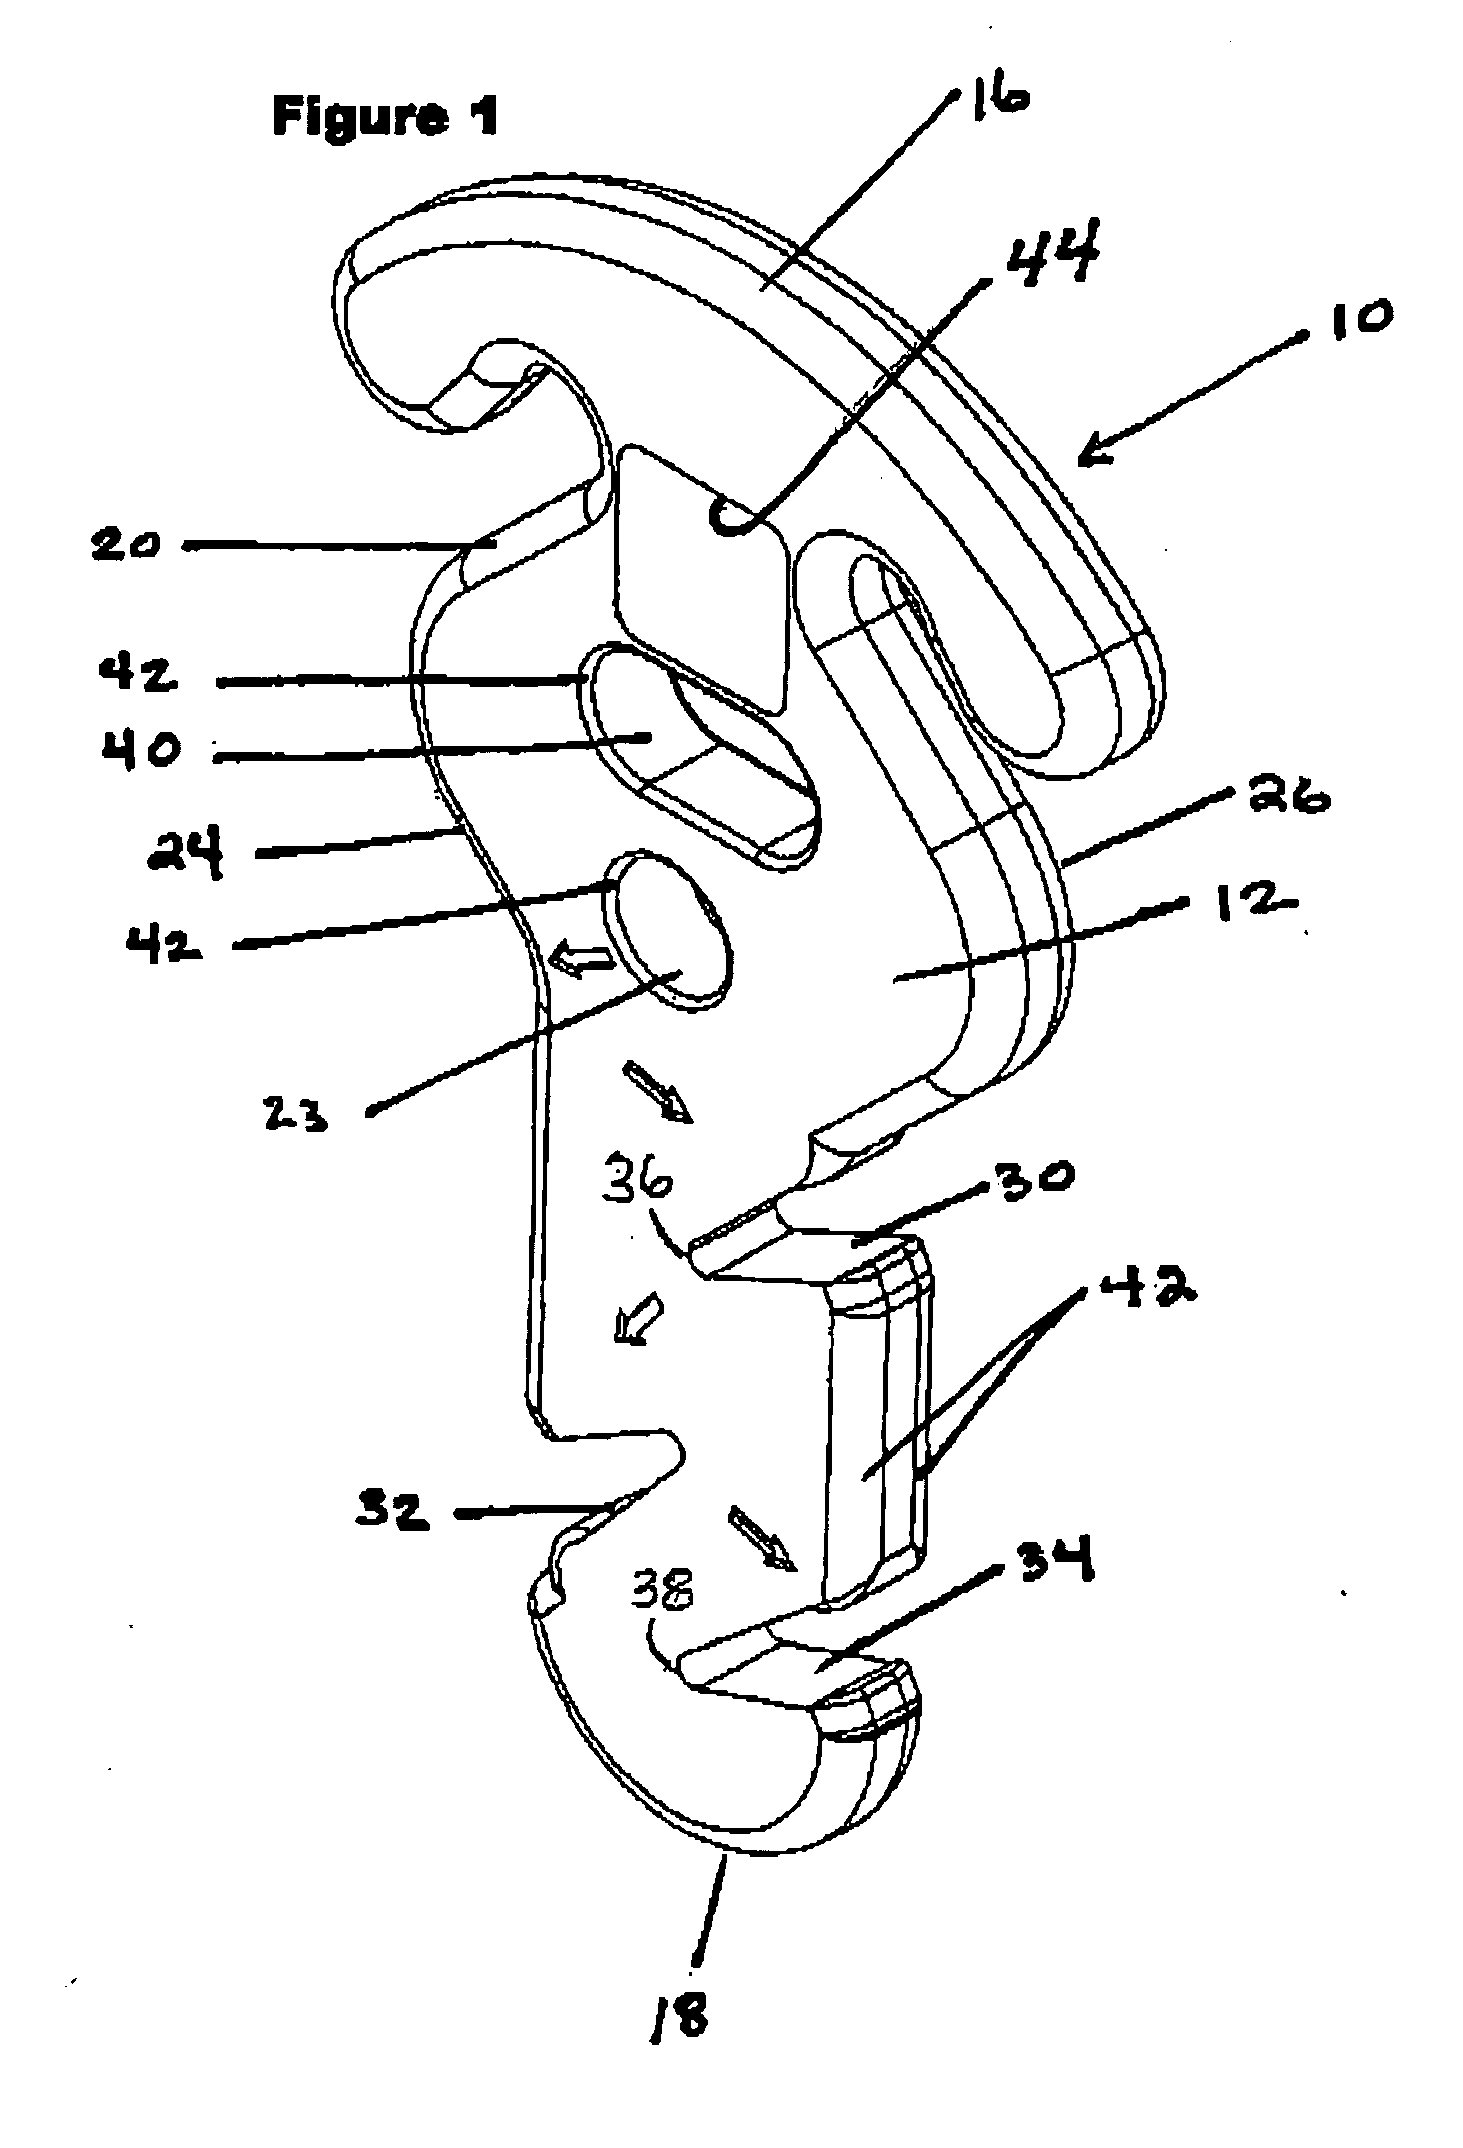 Line tensioning and coupling apparatus